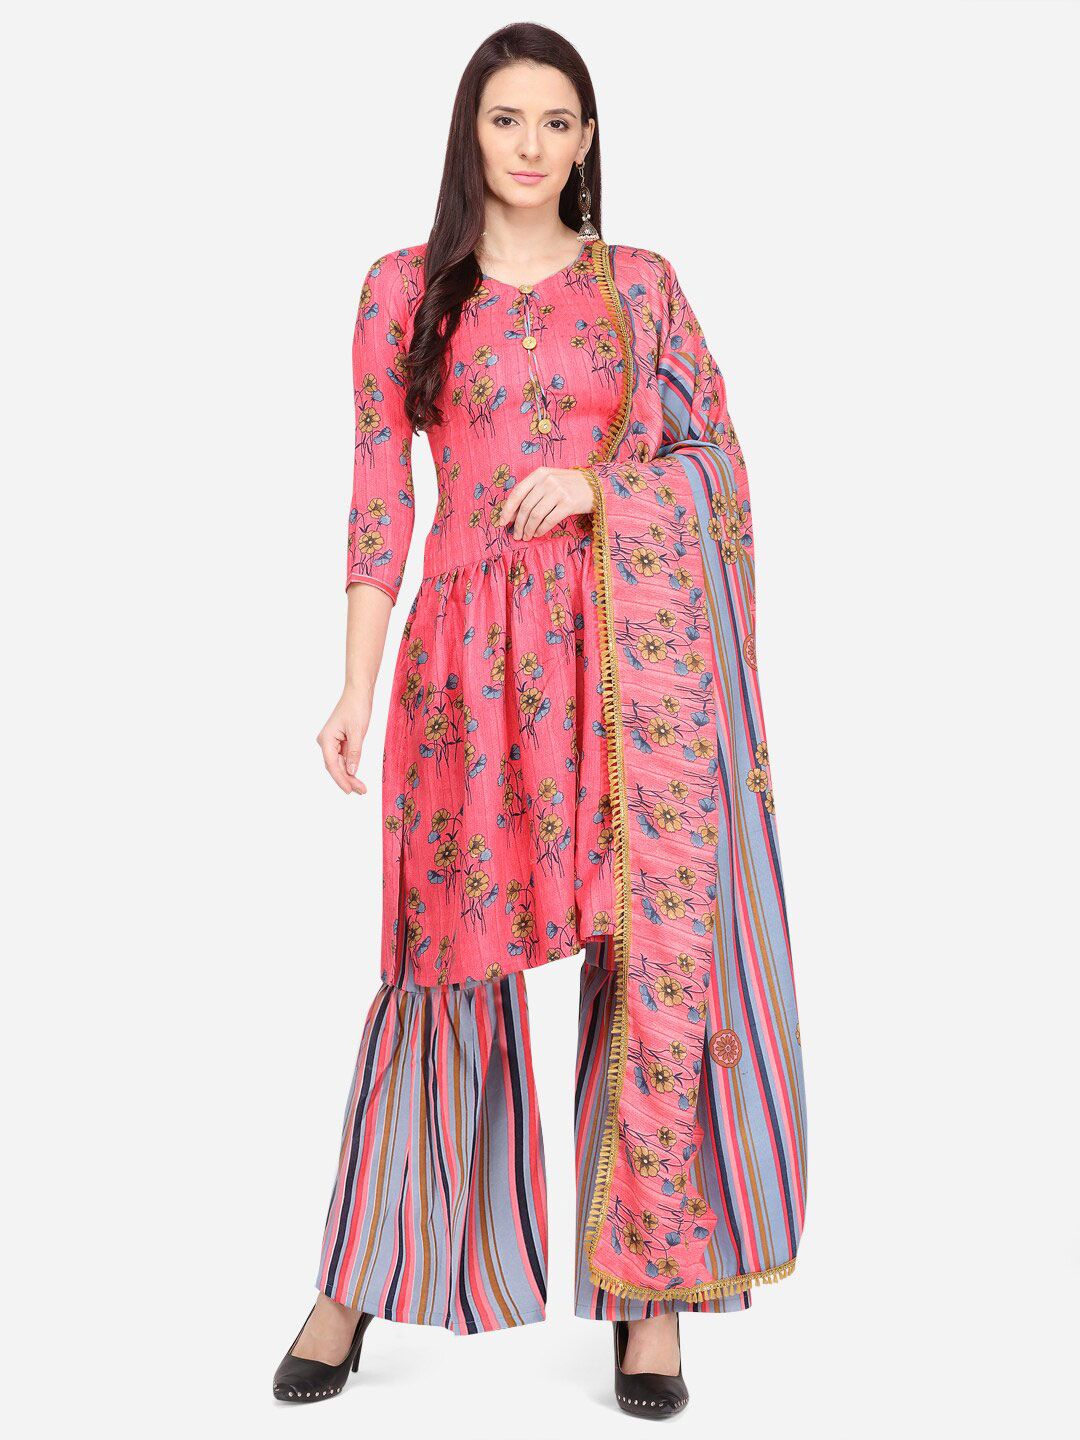 SHAVYA Pink & Blue Printed Unstitched Dress Material Price in India